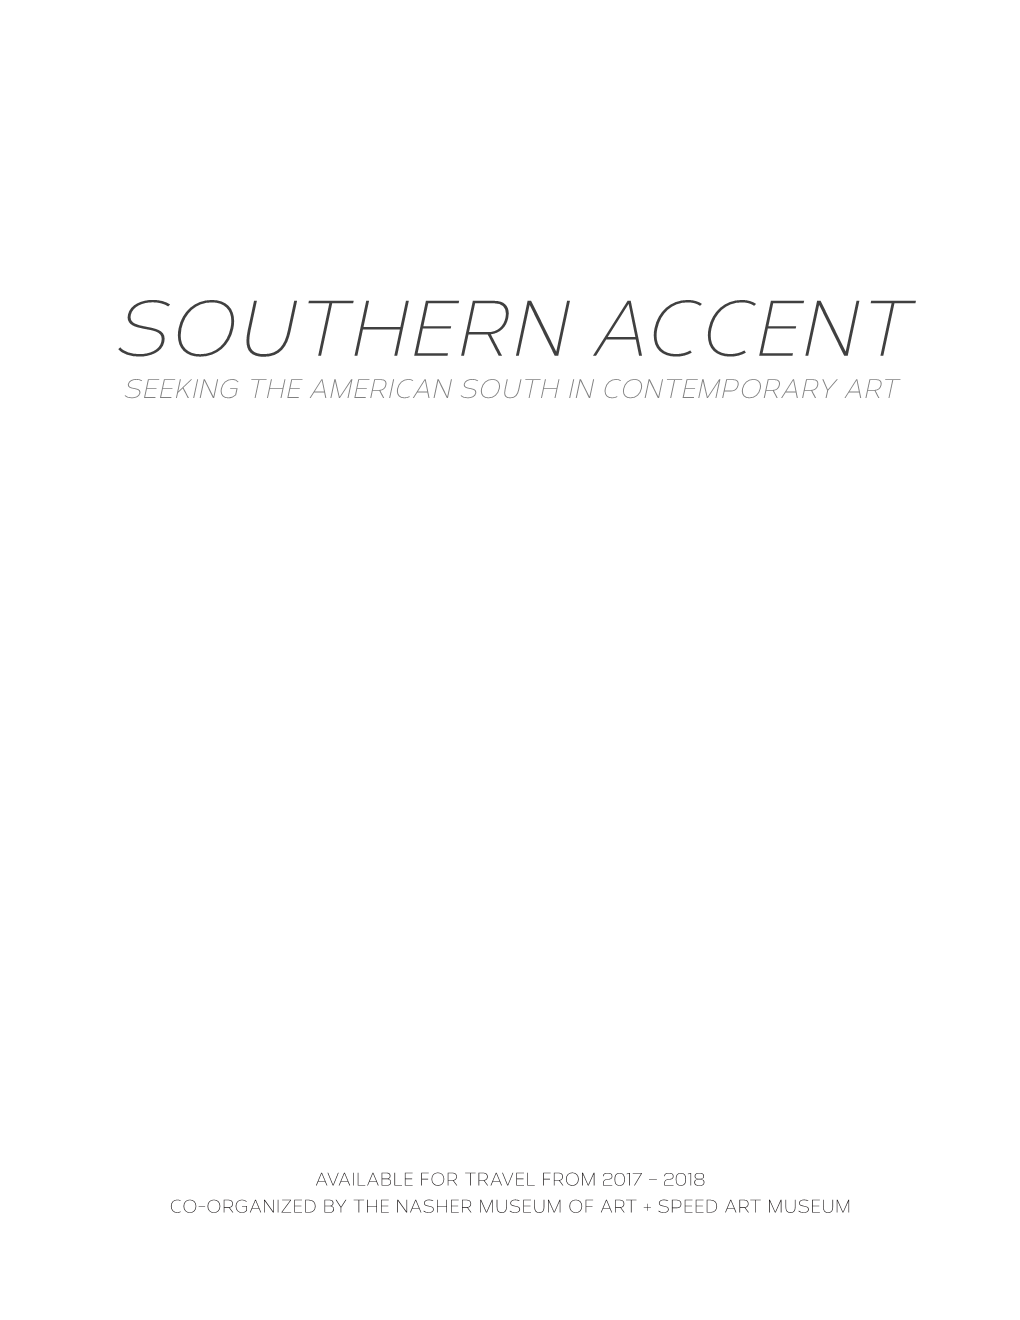 Southern Accent Seeking the American South in Contemporary Art